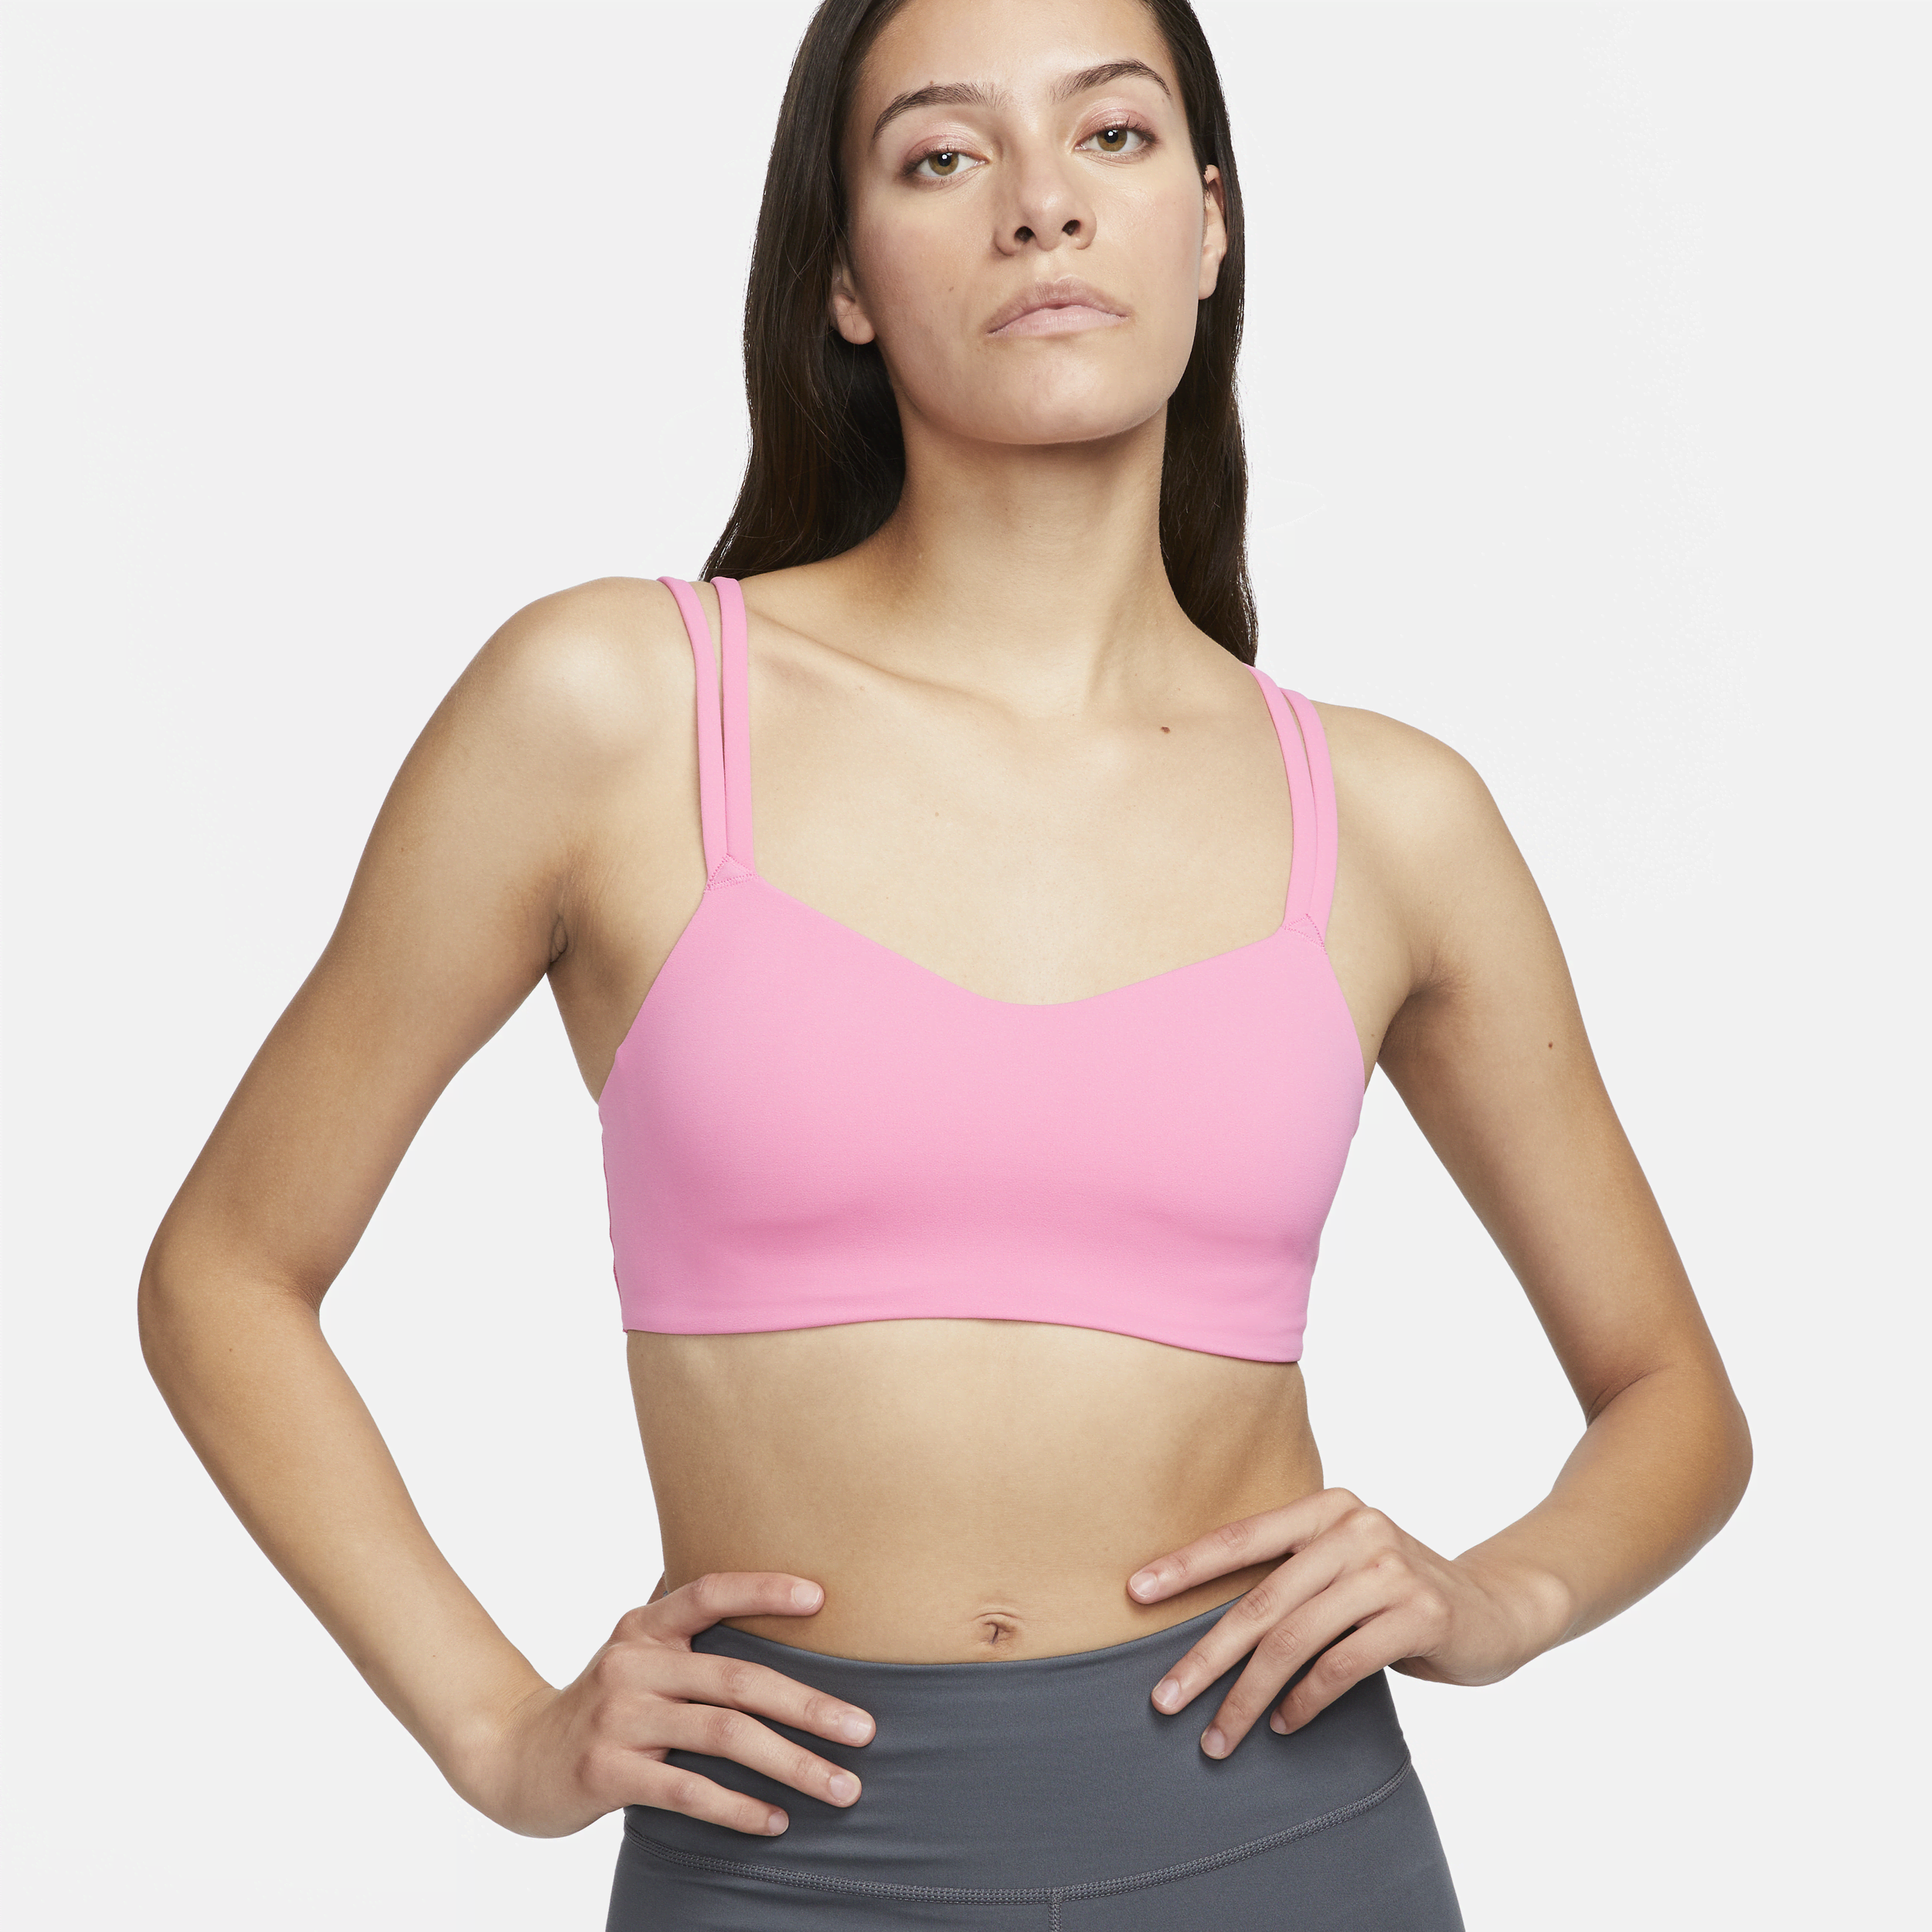 NIKE Nike Dri-FIT Alate Women's Light-Support Padded Strappy